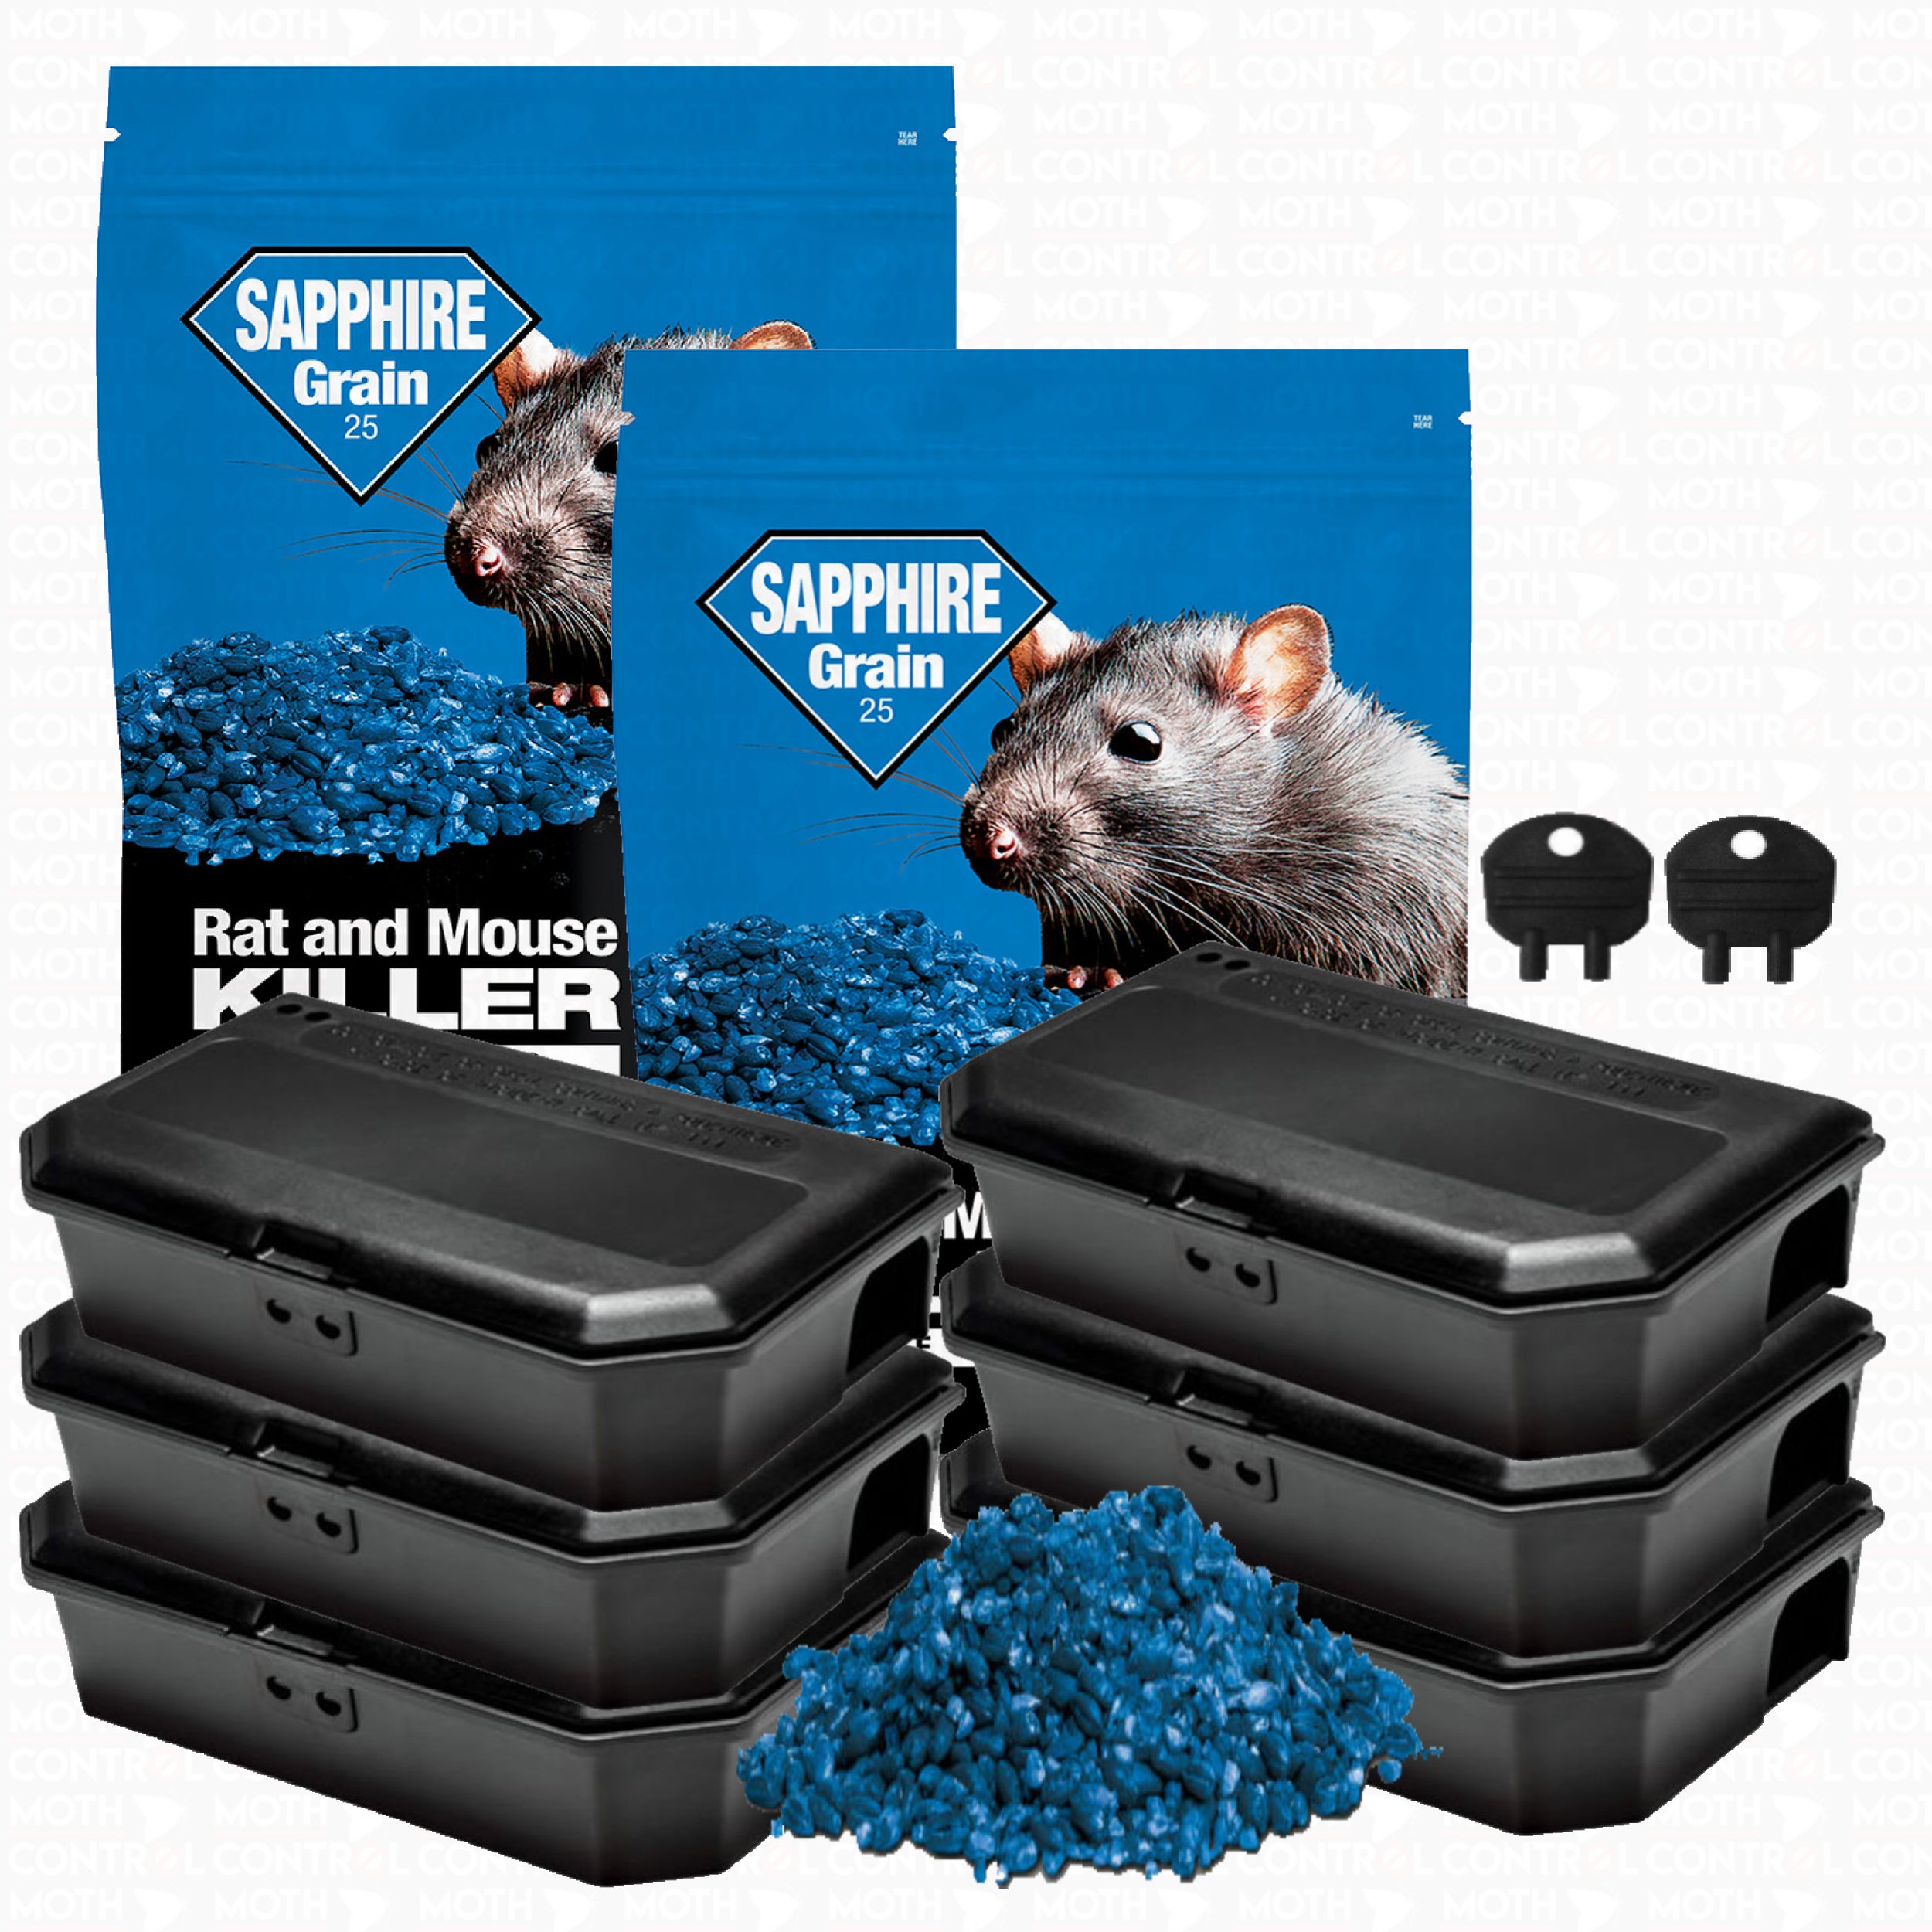 Mouse Mice Bait Station Special Control Boxes with Single Feed Kill Grain Bait (6 Mice Boxes + 300g Grain Bait) - Moth Control